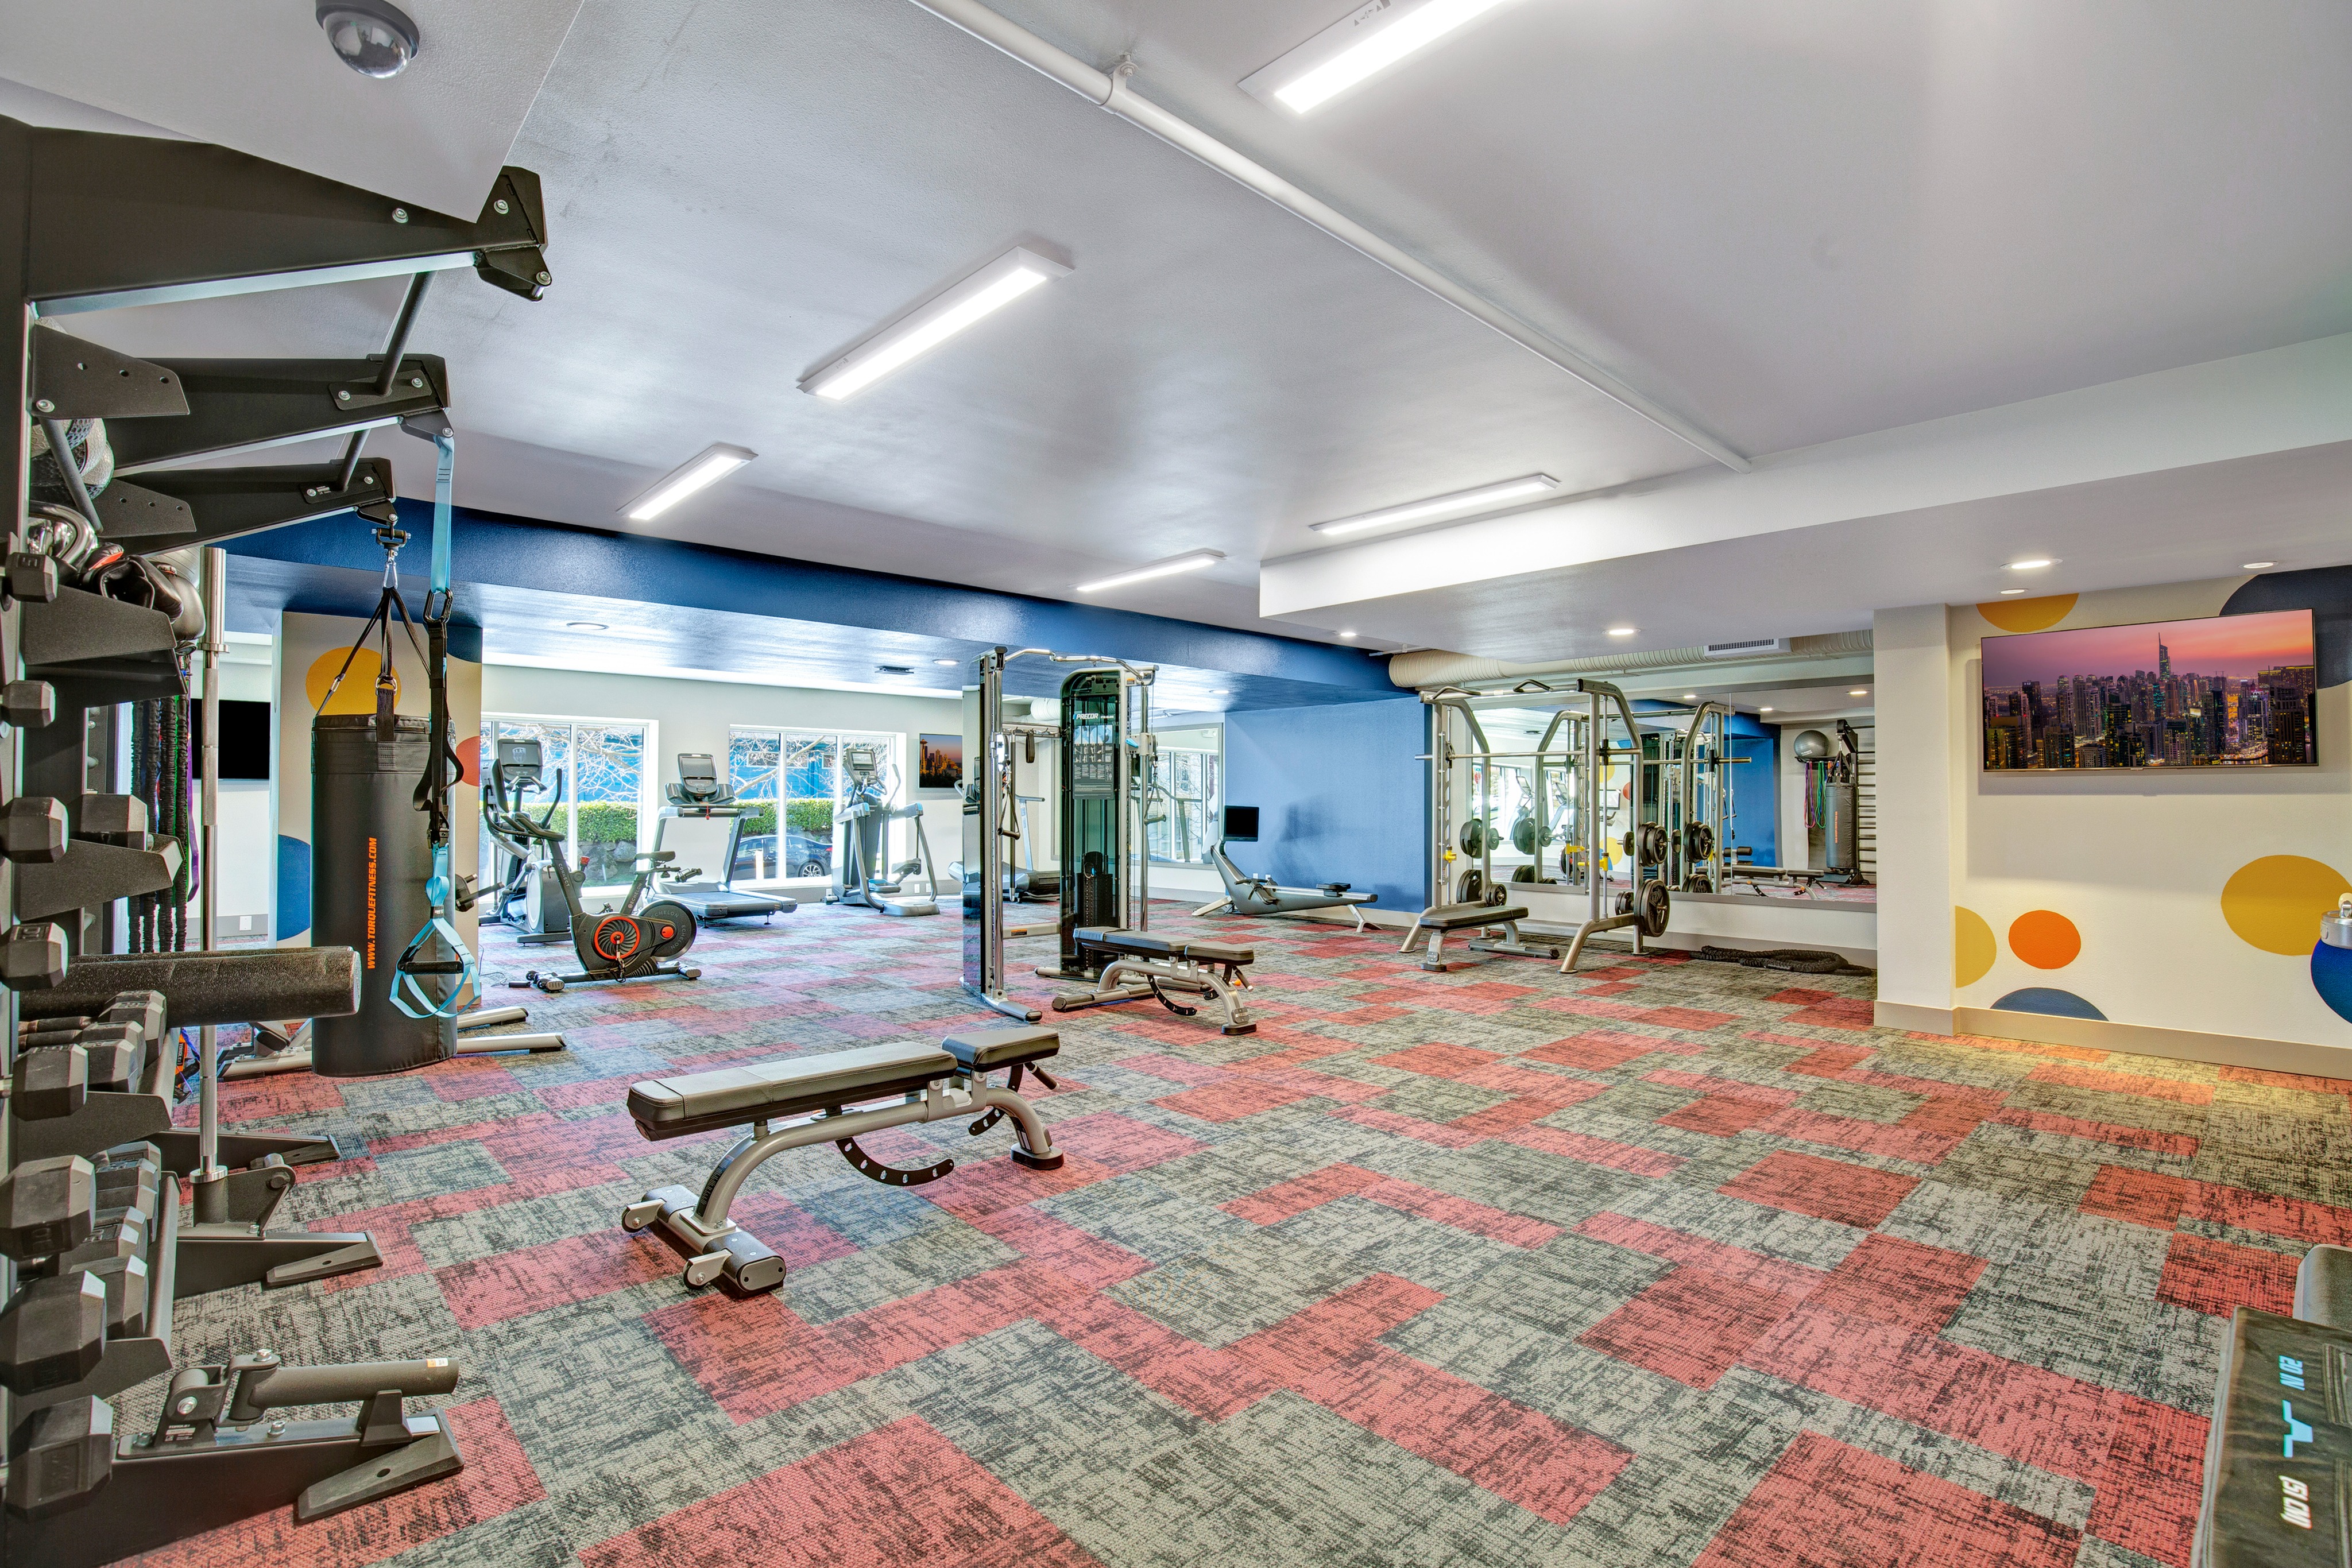 24 Hour State of the Art Fitness Center